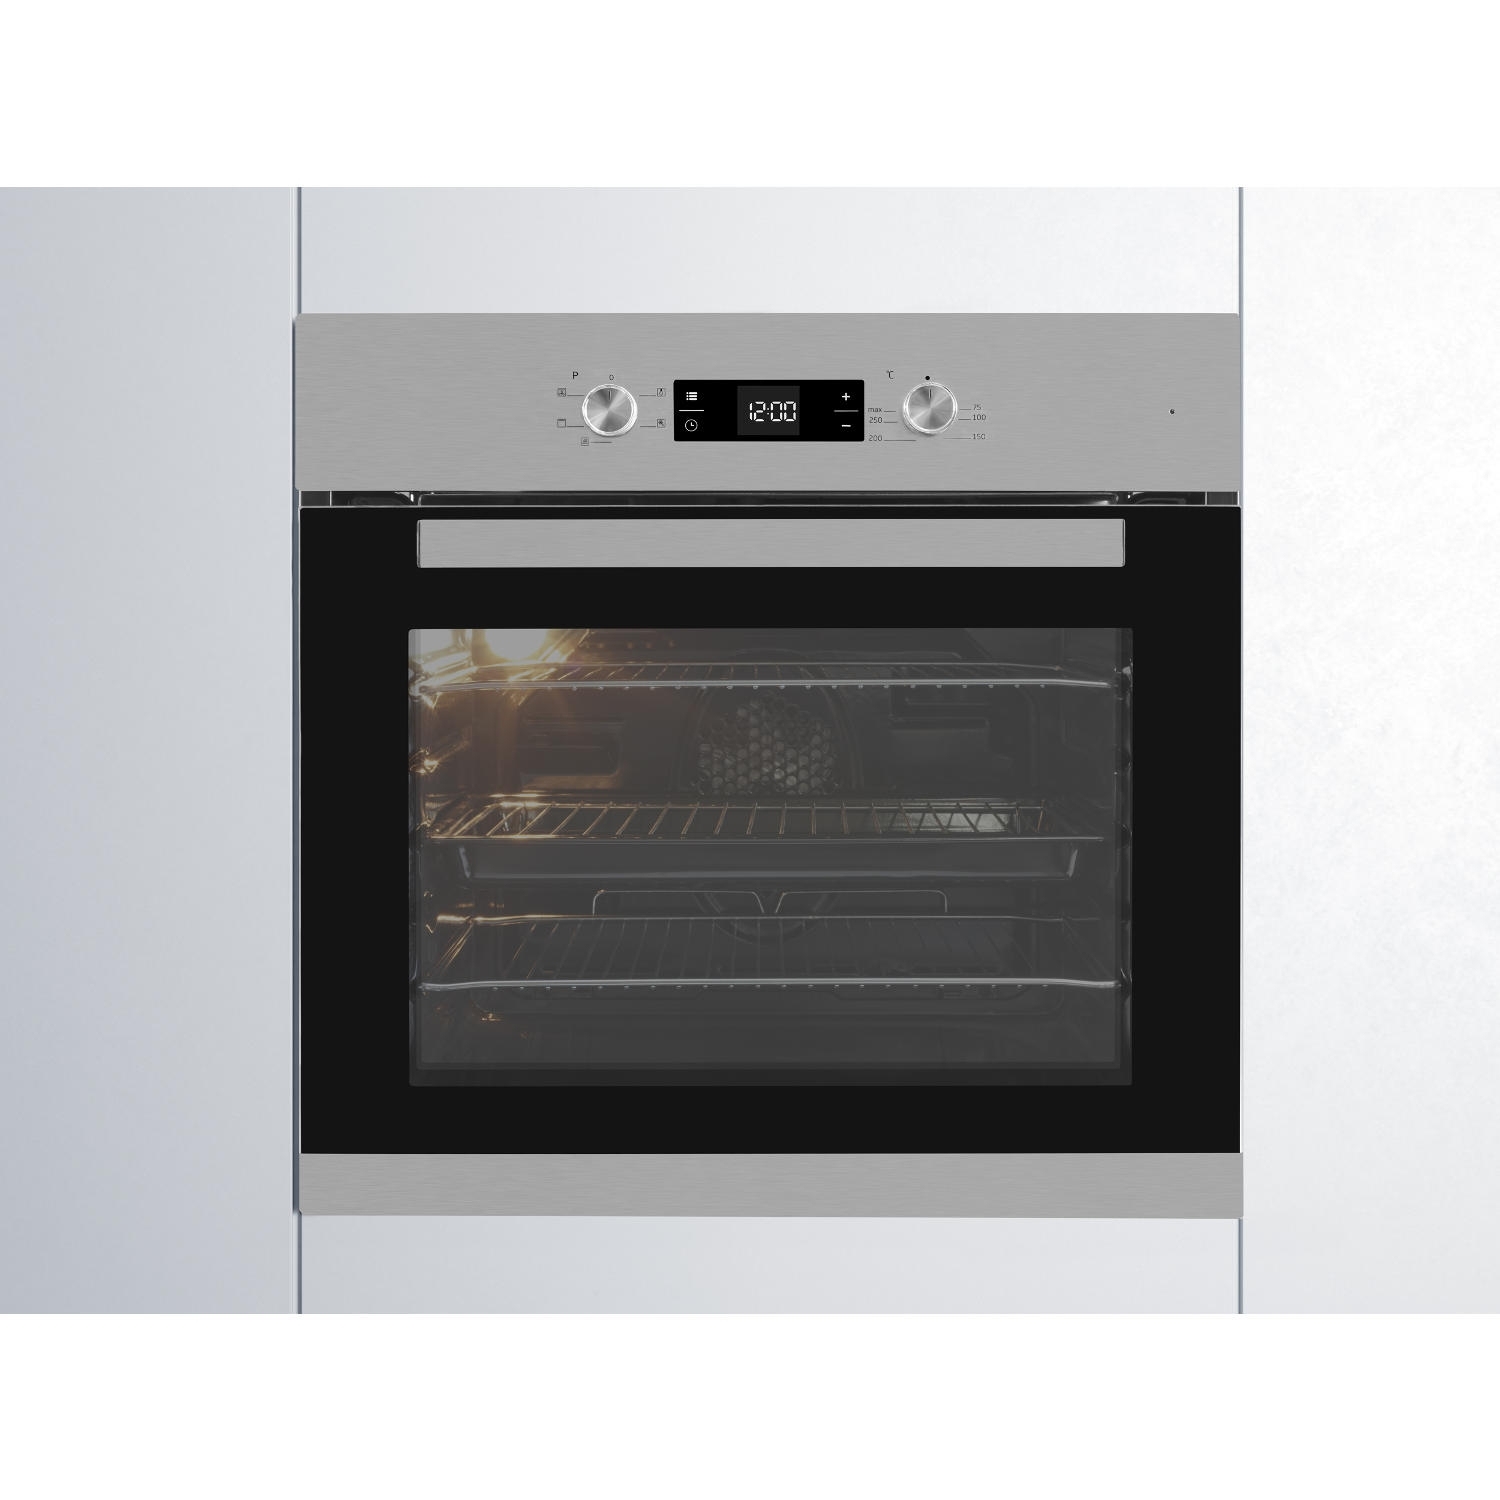 Beko Built In Electric Programmable Single Oven - Stainless Steel - A Rated - 1